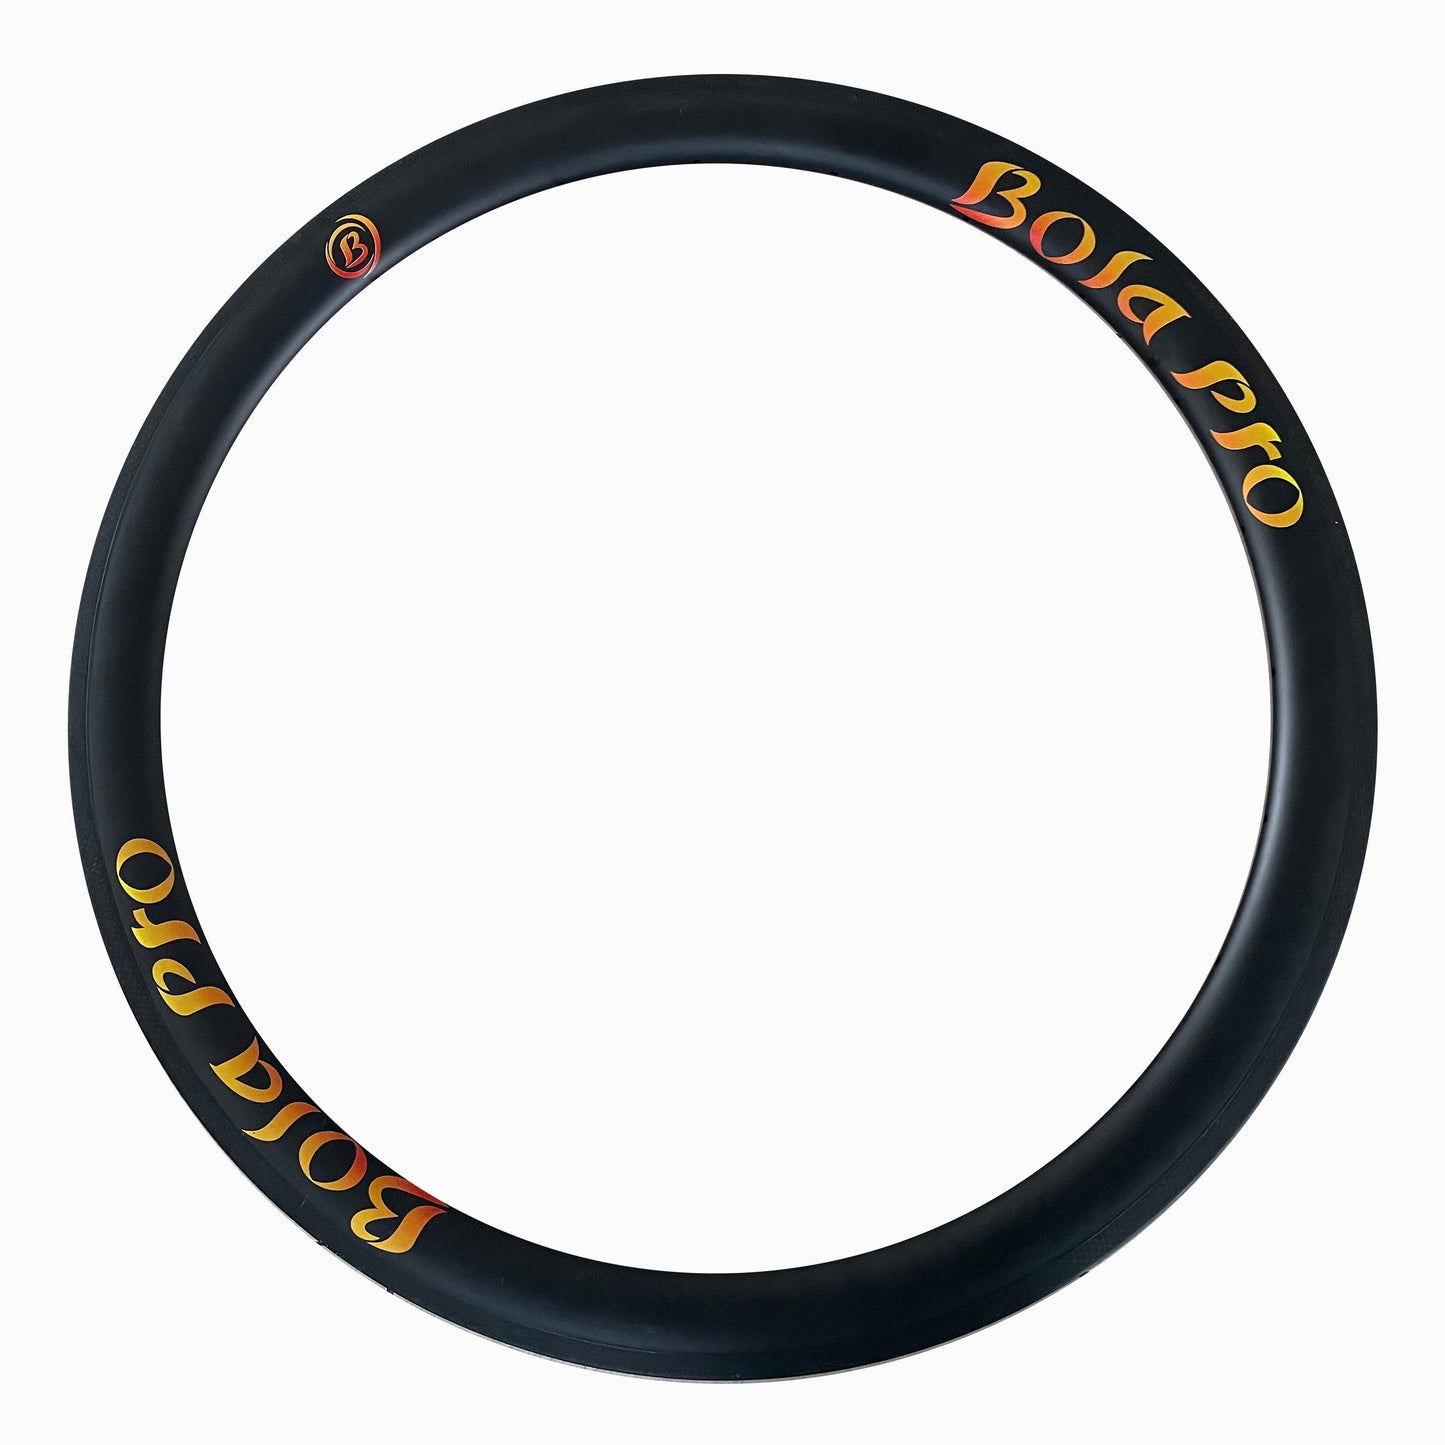 700c Asymmetric route clincher carbon bike rim 38mm low profile  25mm outer wide 18mm inner wide,hook or hookless